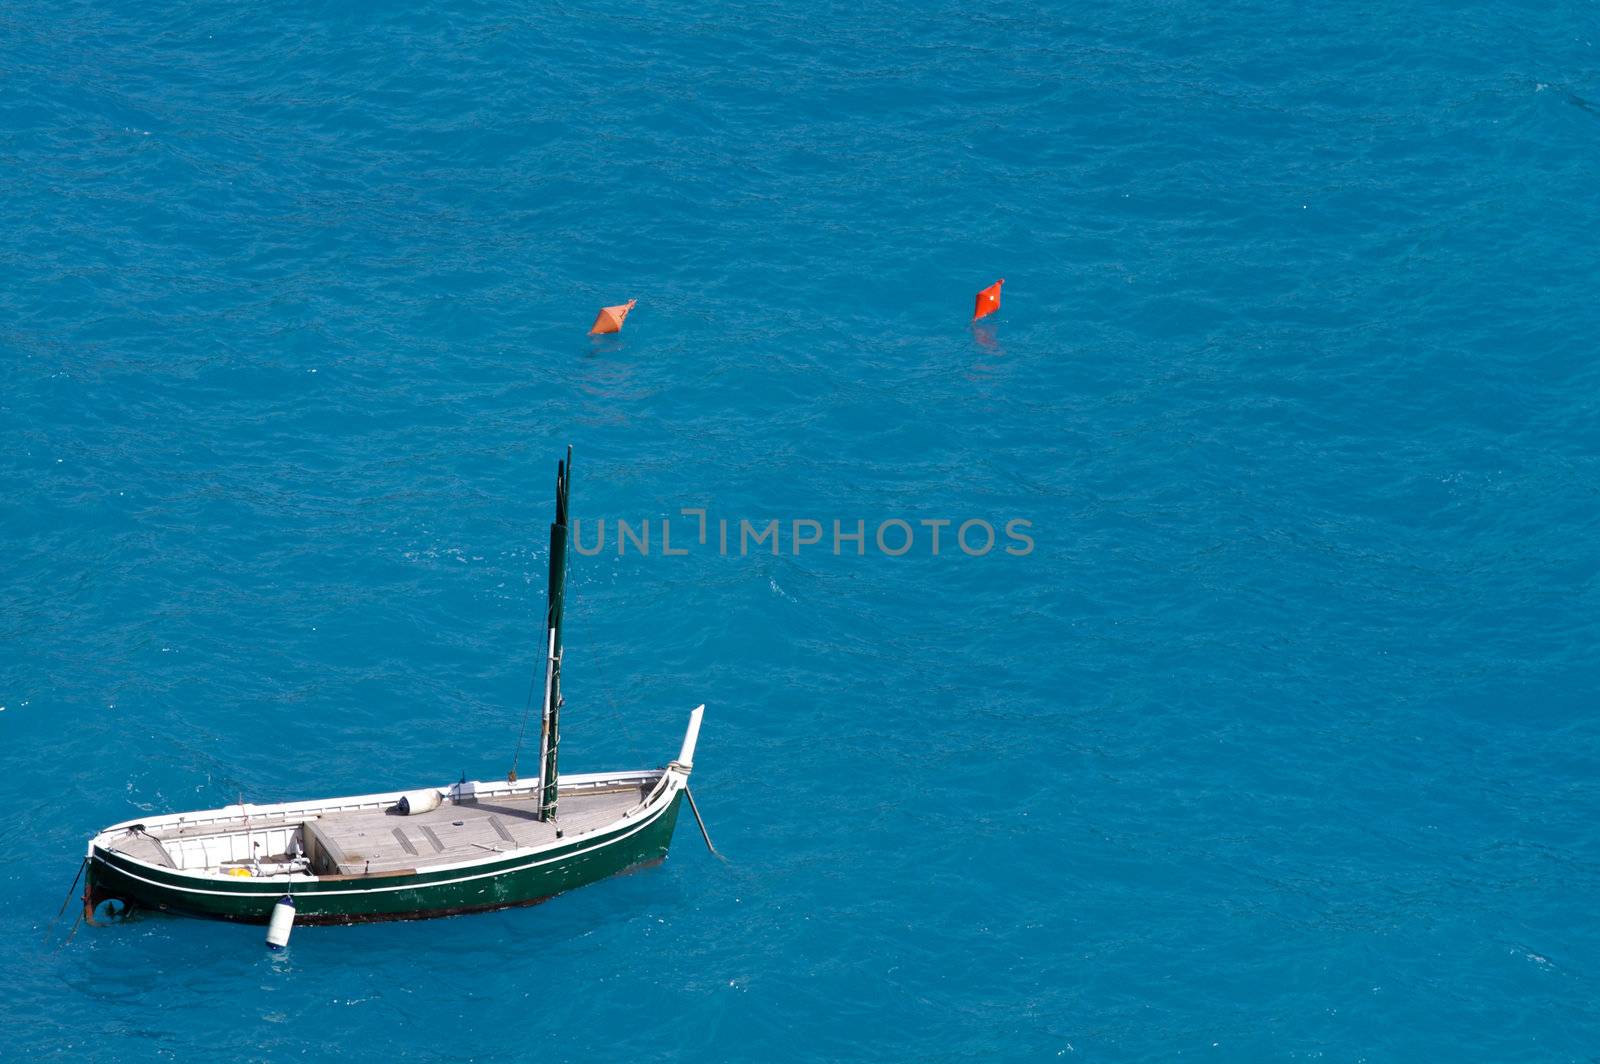 Boat floating on blue water. Space left intentionally blank for text